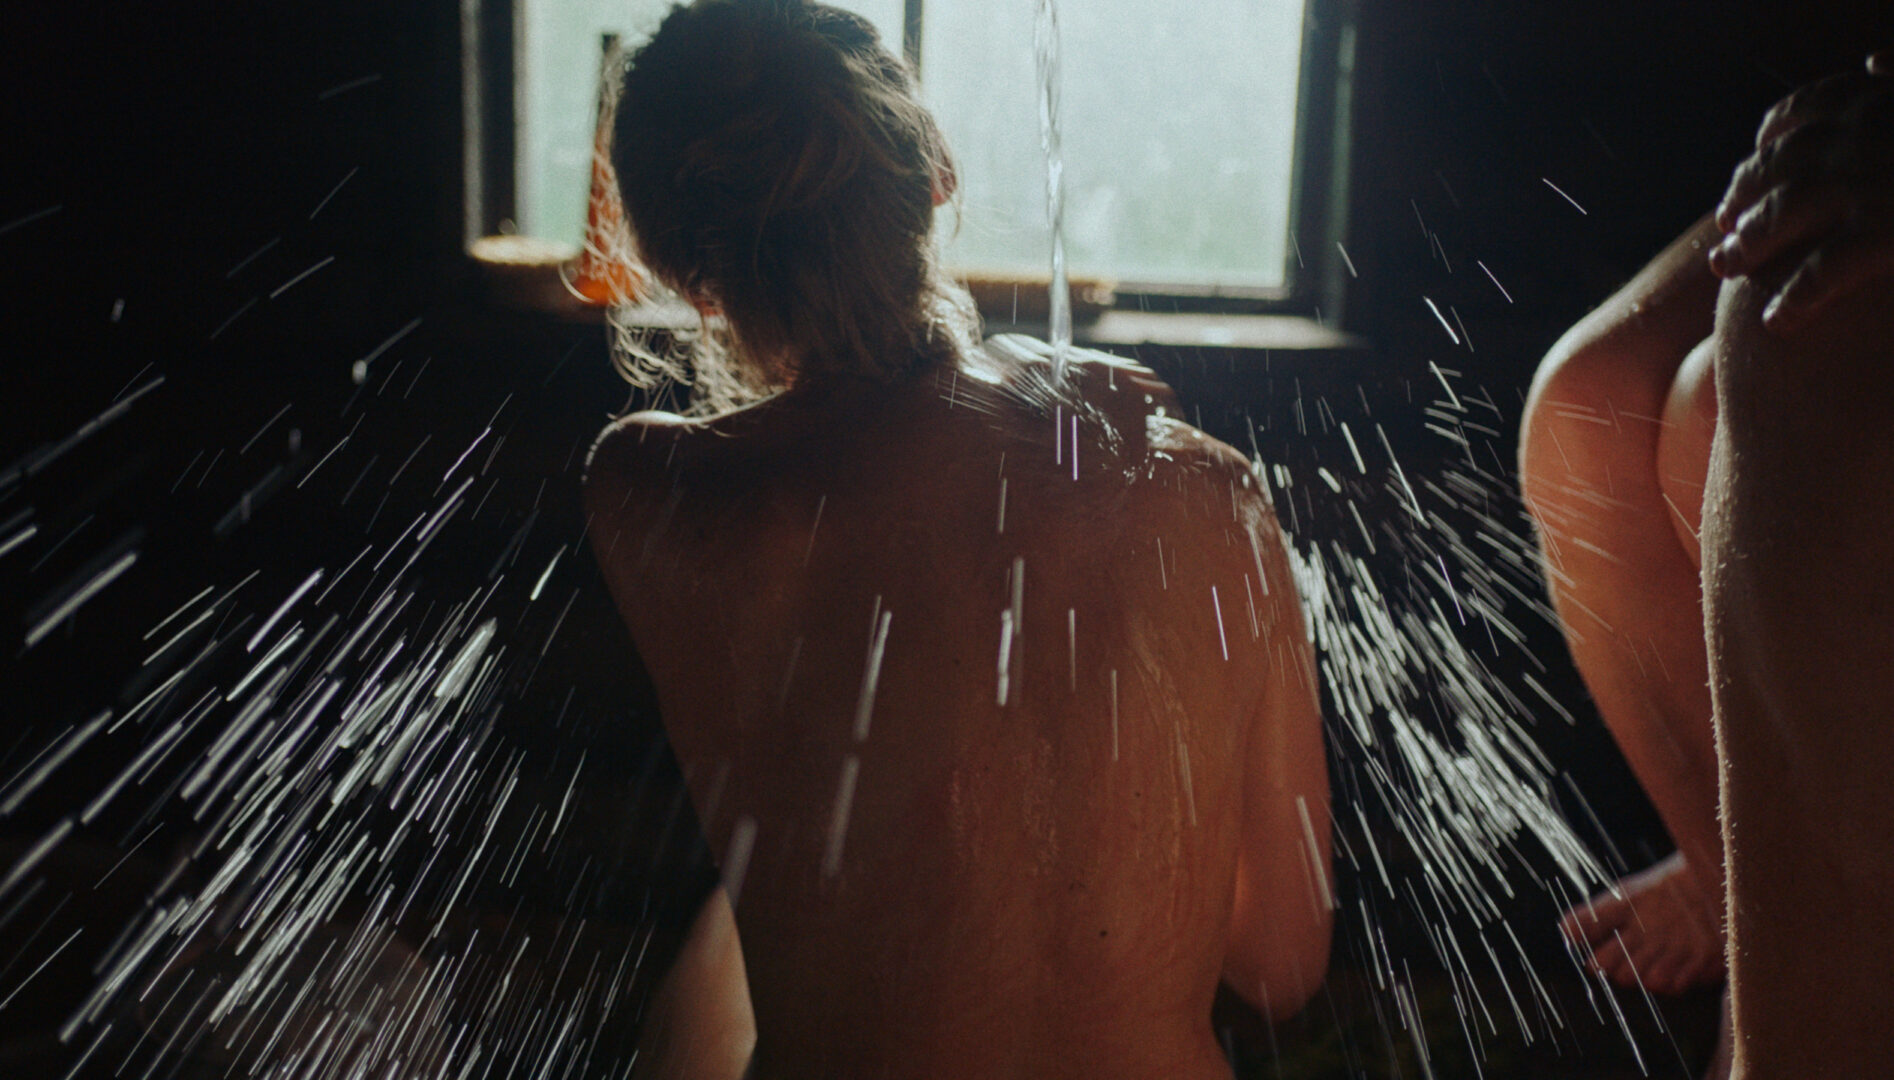 Photograph of a woman's back with water being poured over her from above